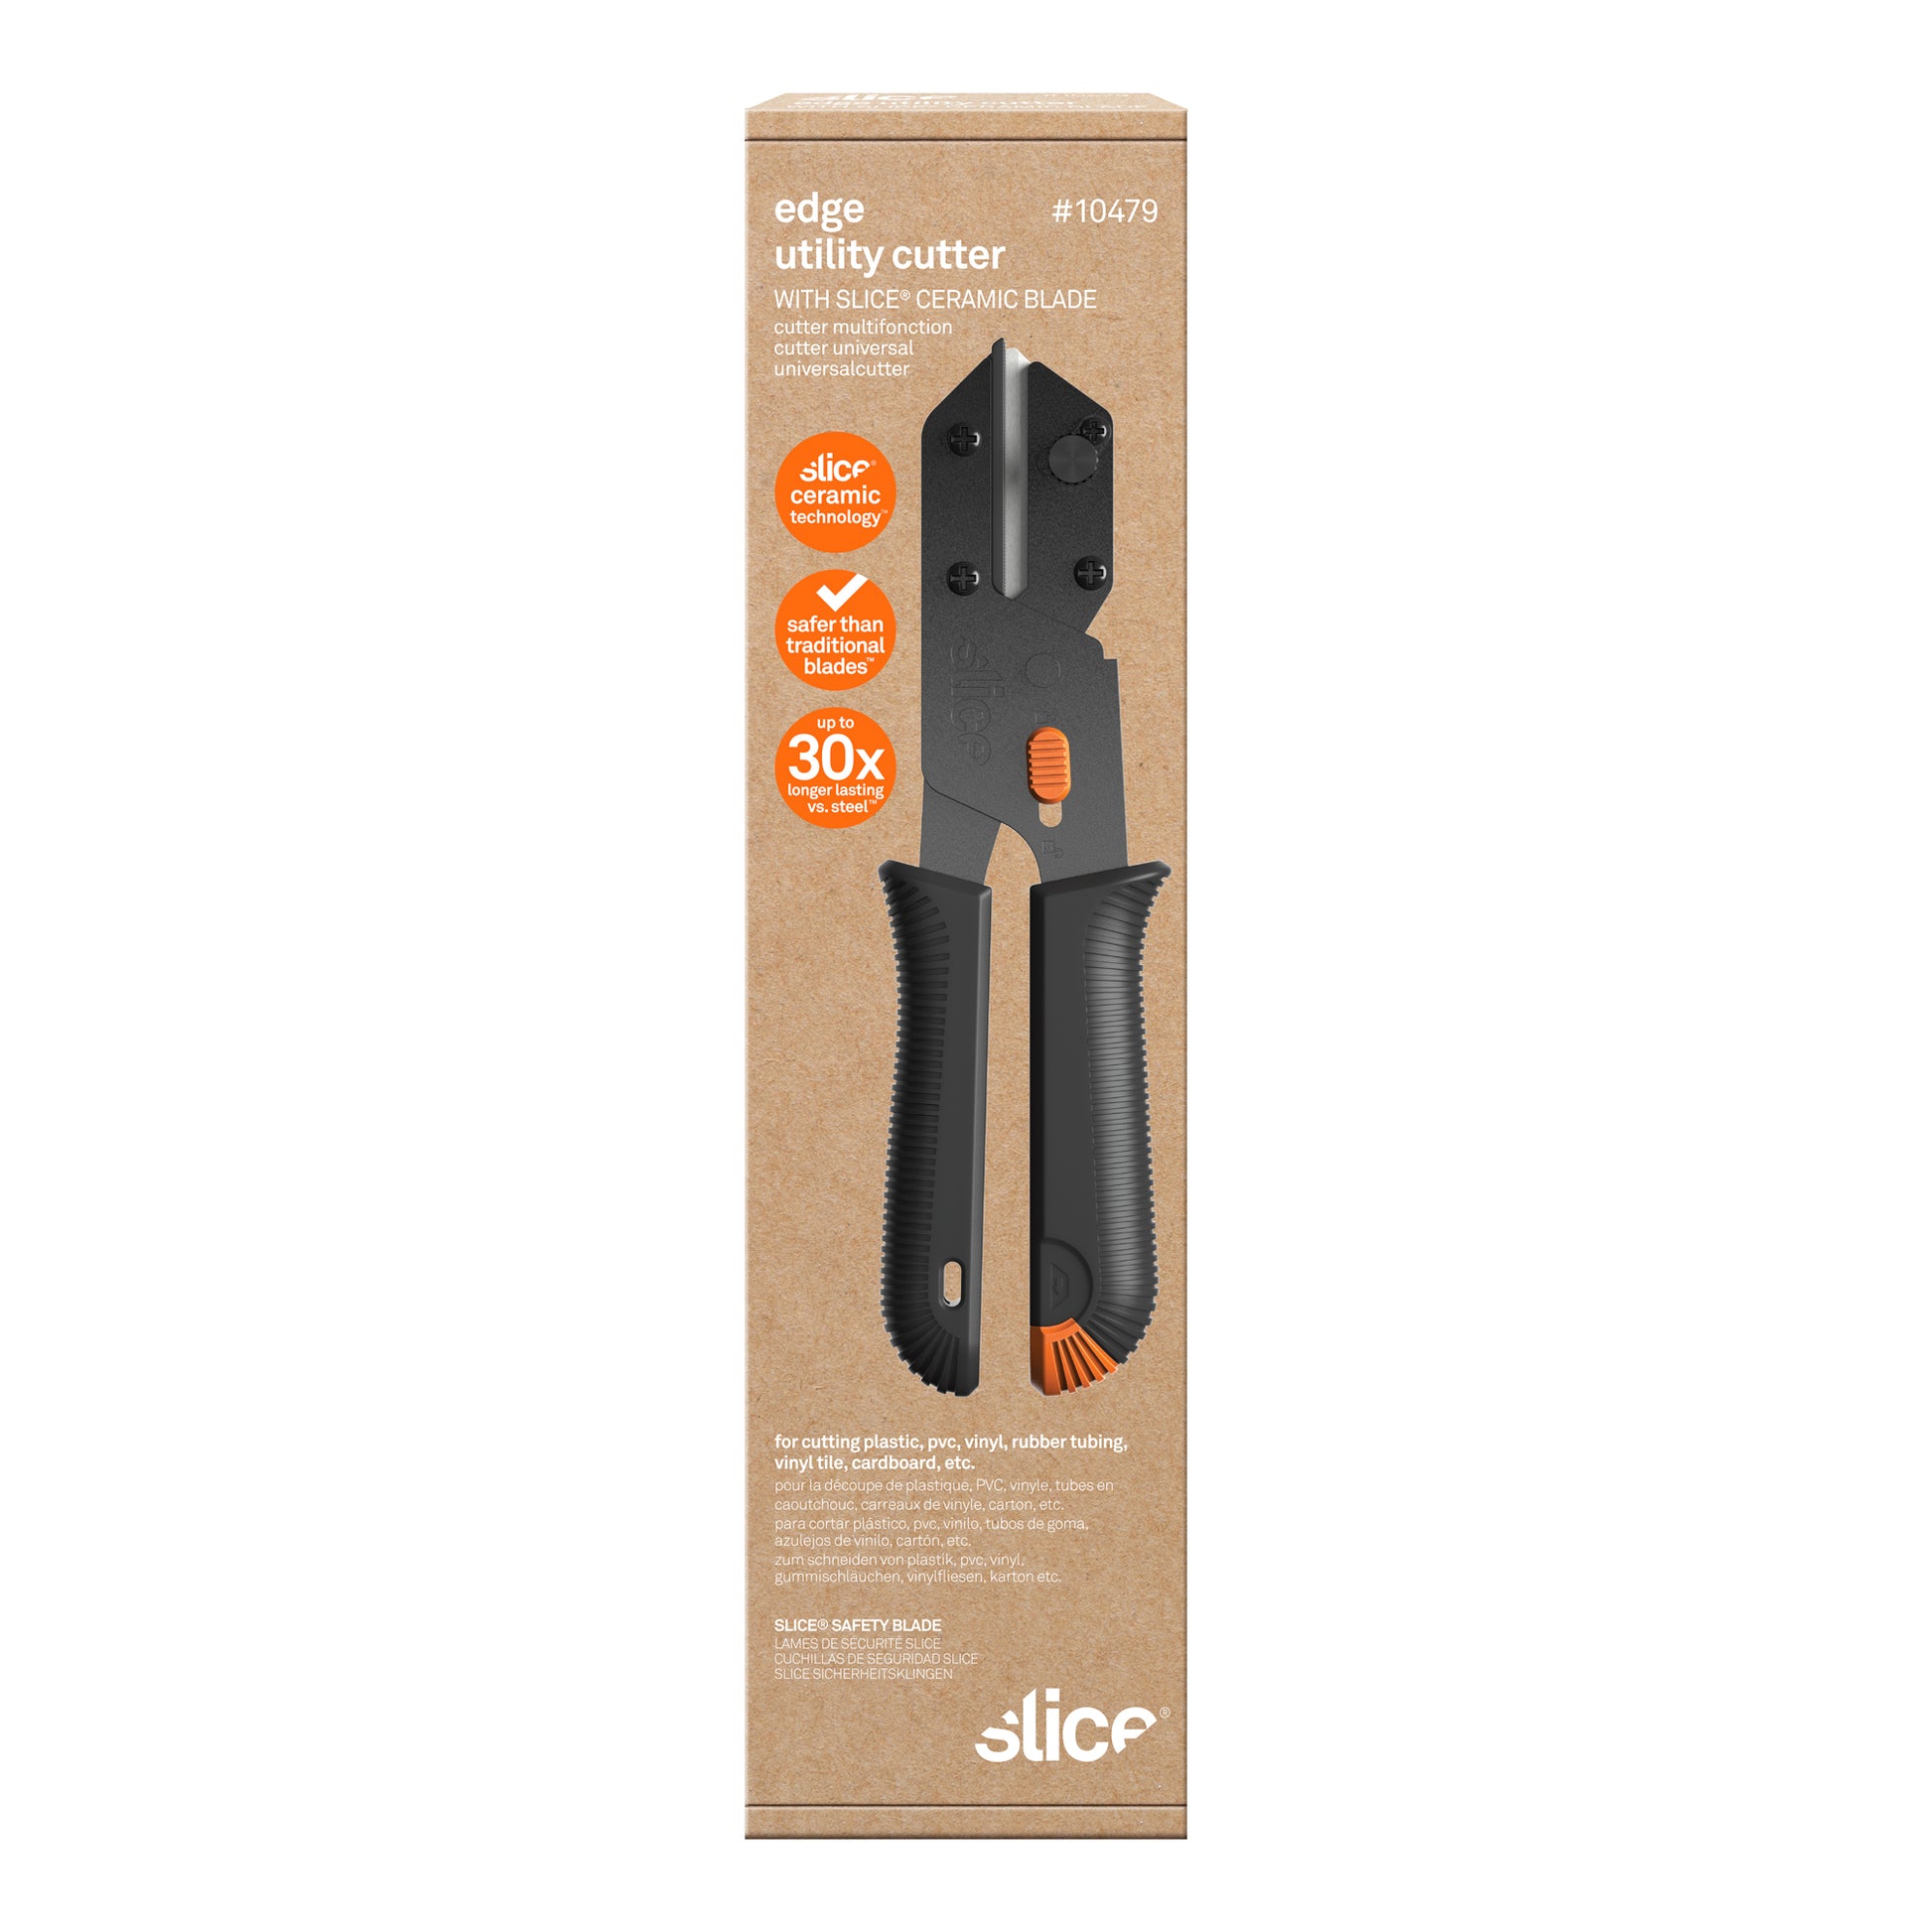 Slice Ceramic Box Cutters and other Slice Products are a Cut Above